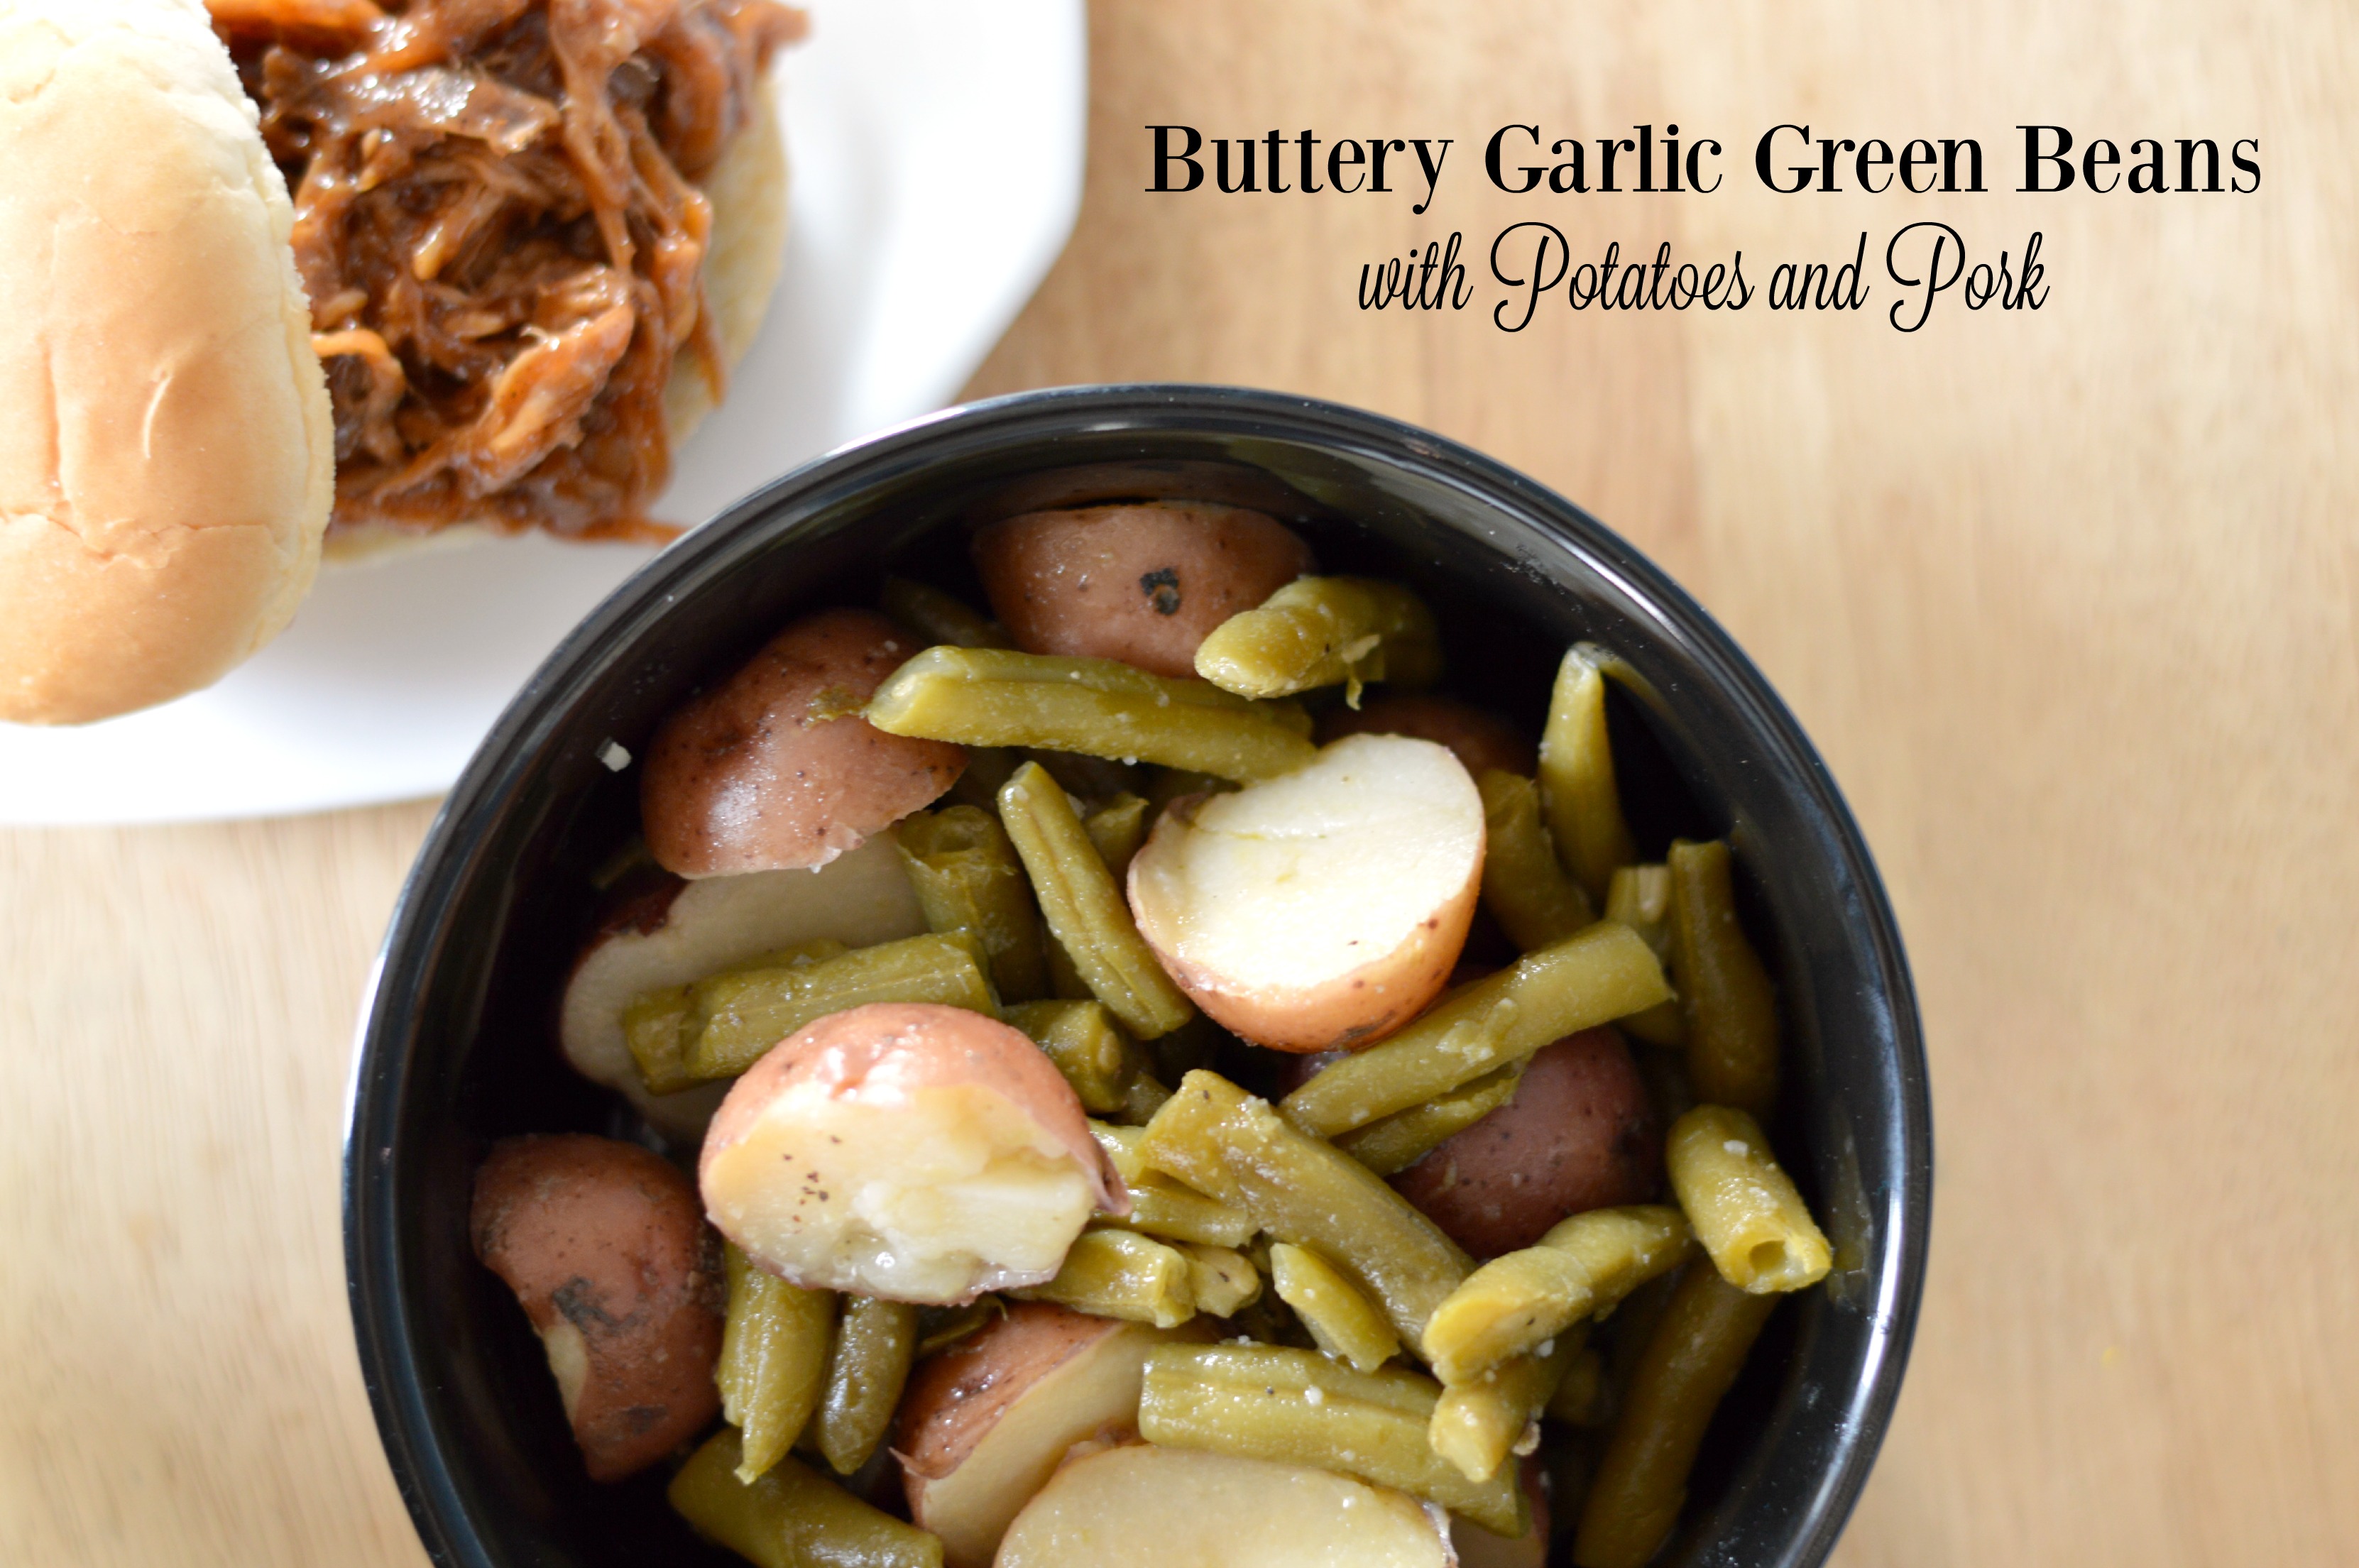 Buttery Garlic Green Beans with Potatoes and Pork